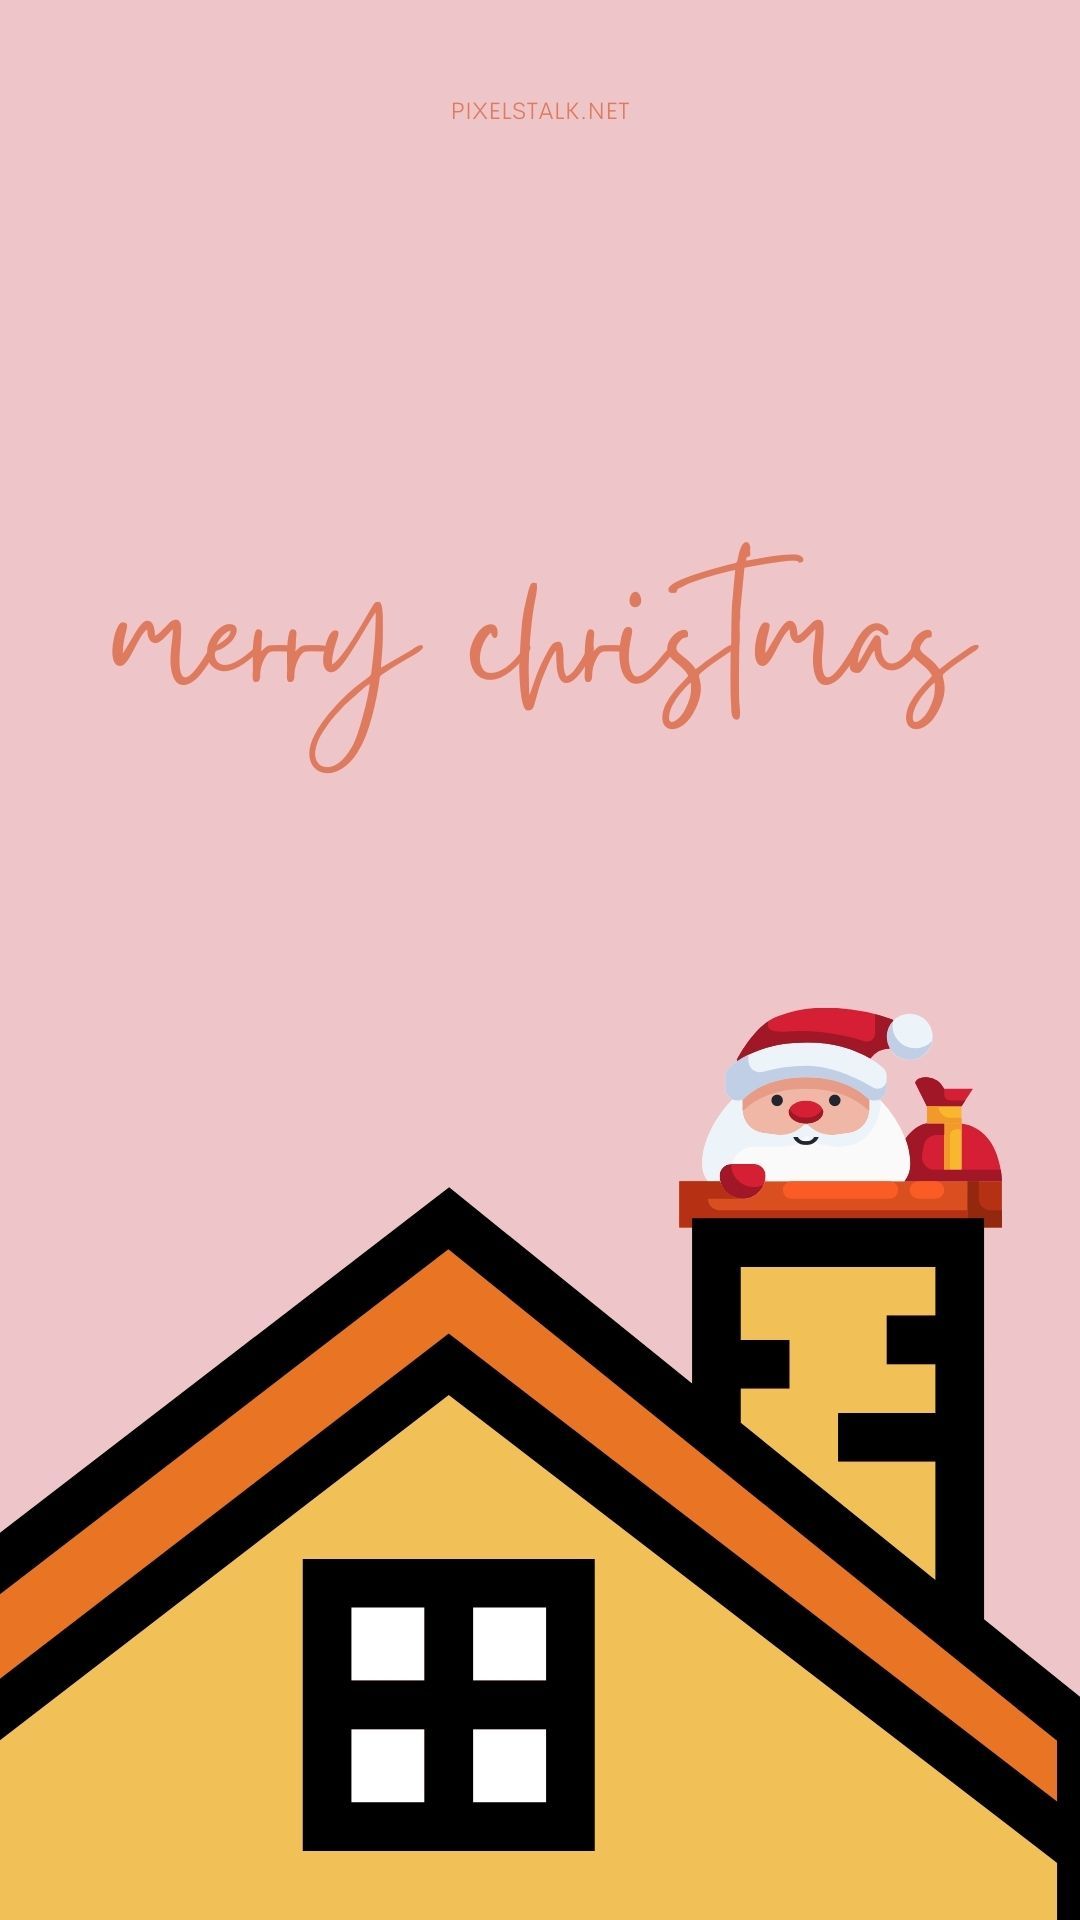 A pink background with a yellow house and Santa Claus coming out of the chimney. - Christmas iPhone